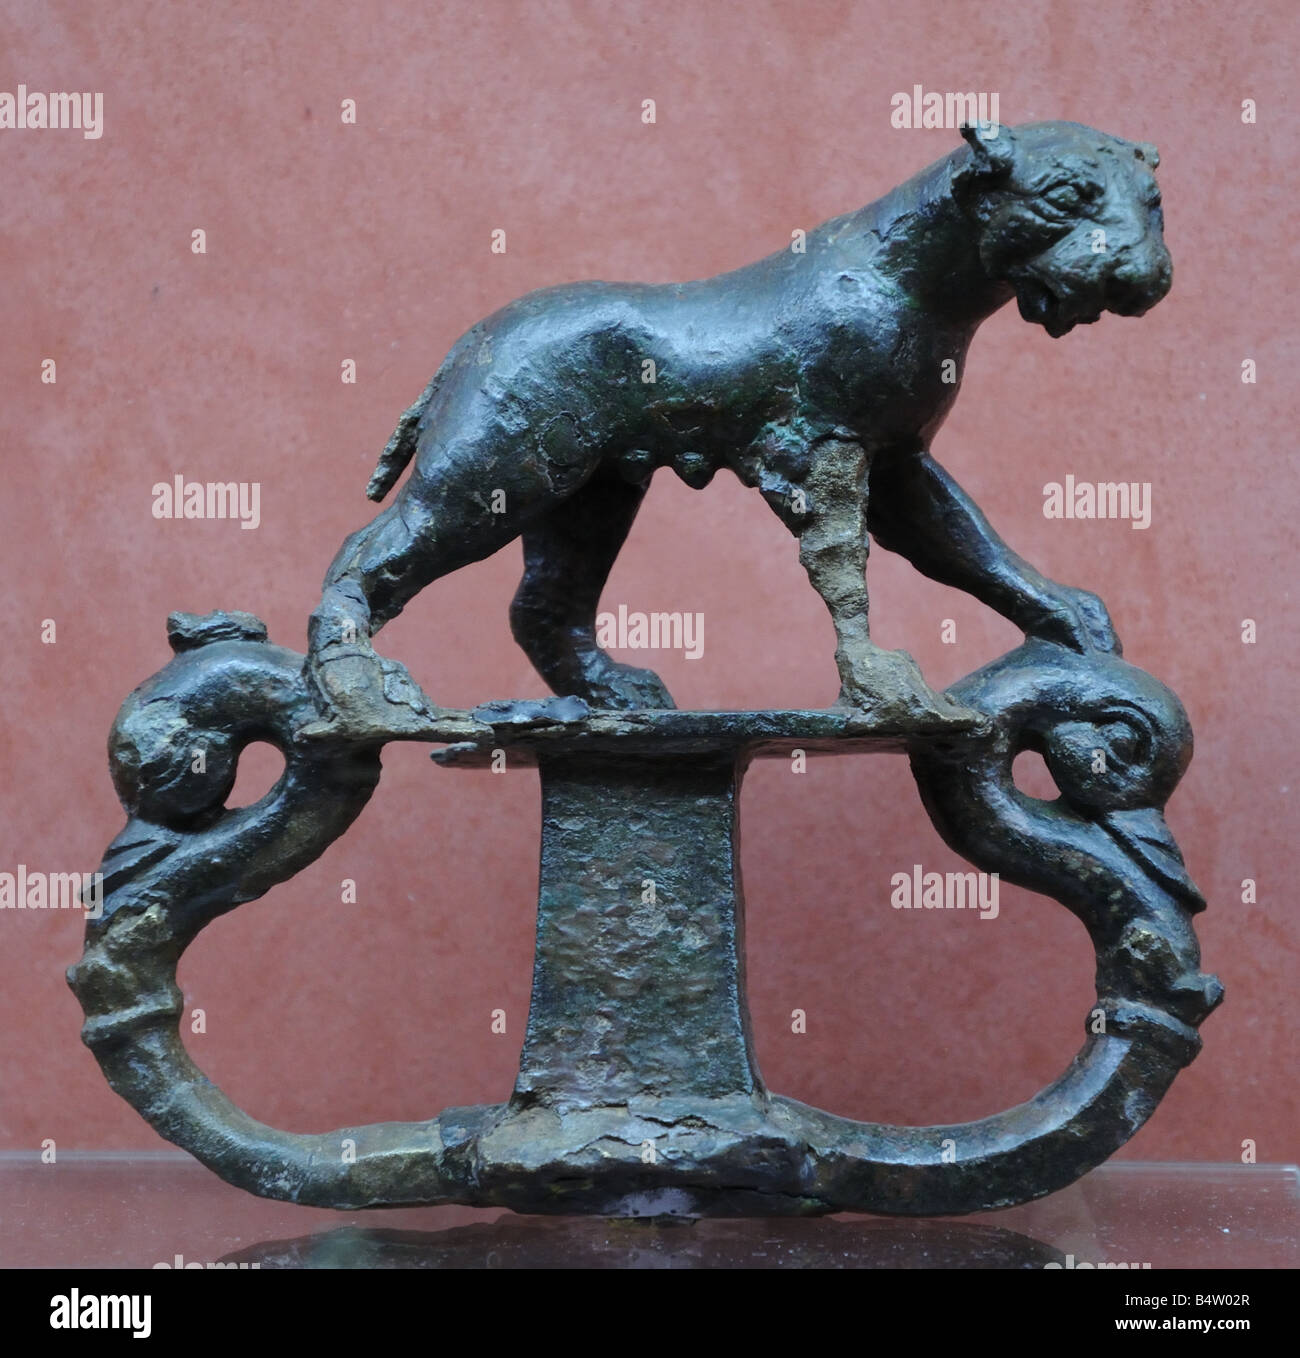 Small metal statue sculpture cast casting of male lion on display in the National Museum of Roman Art Merida Spain Stock Photo